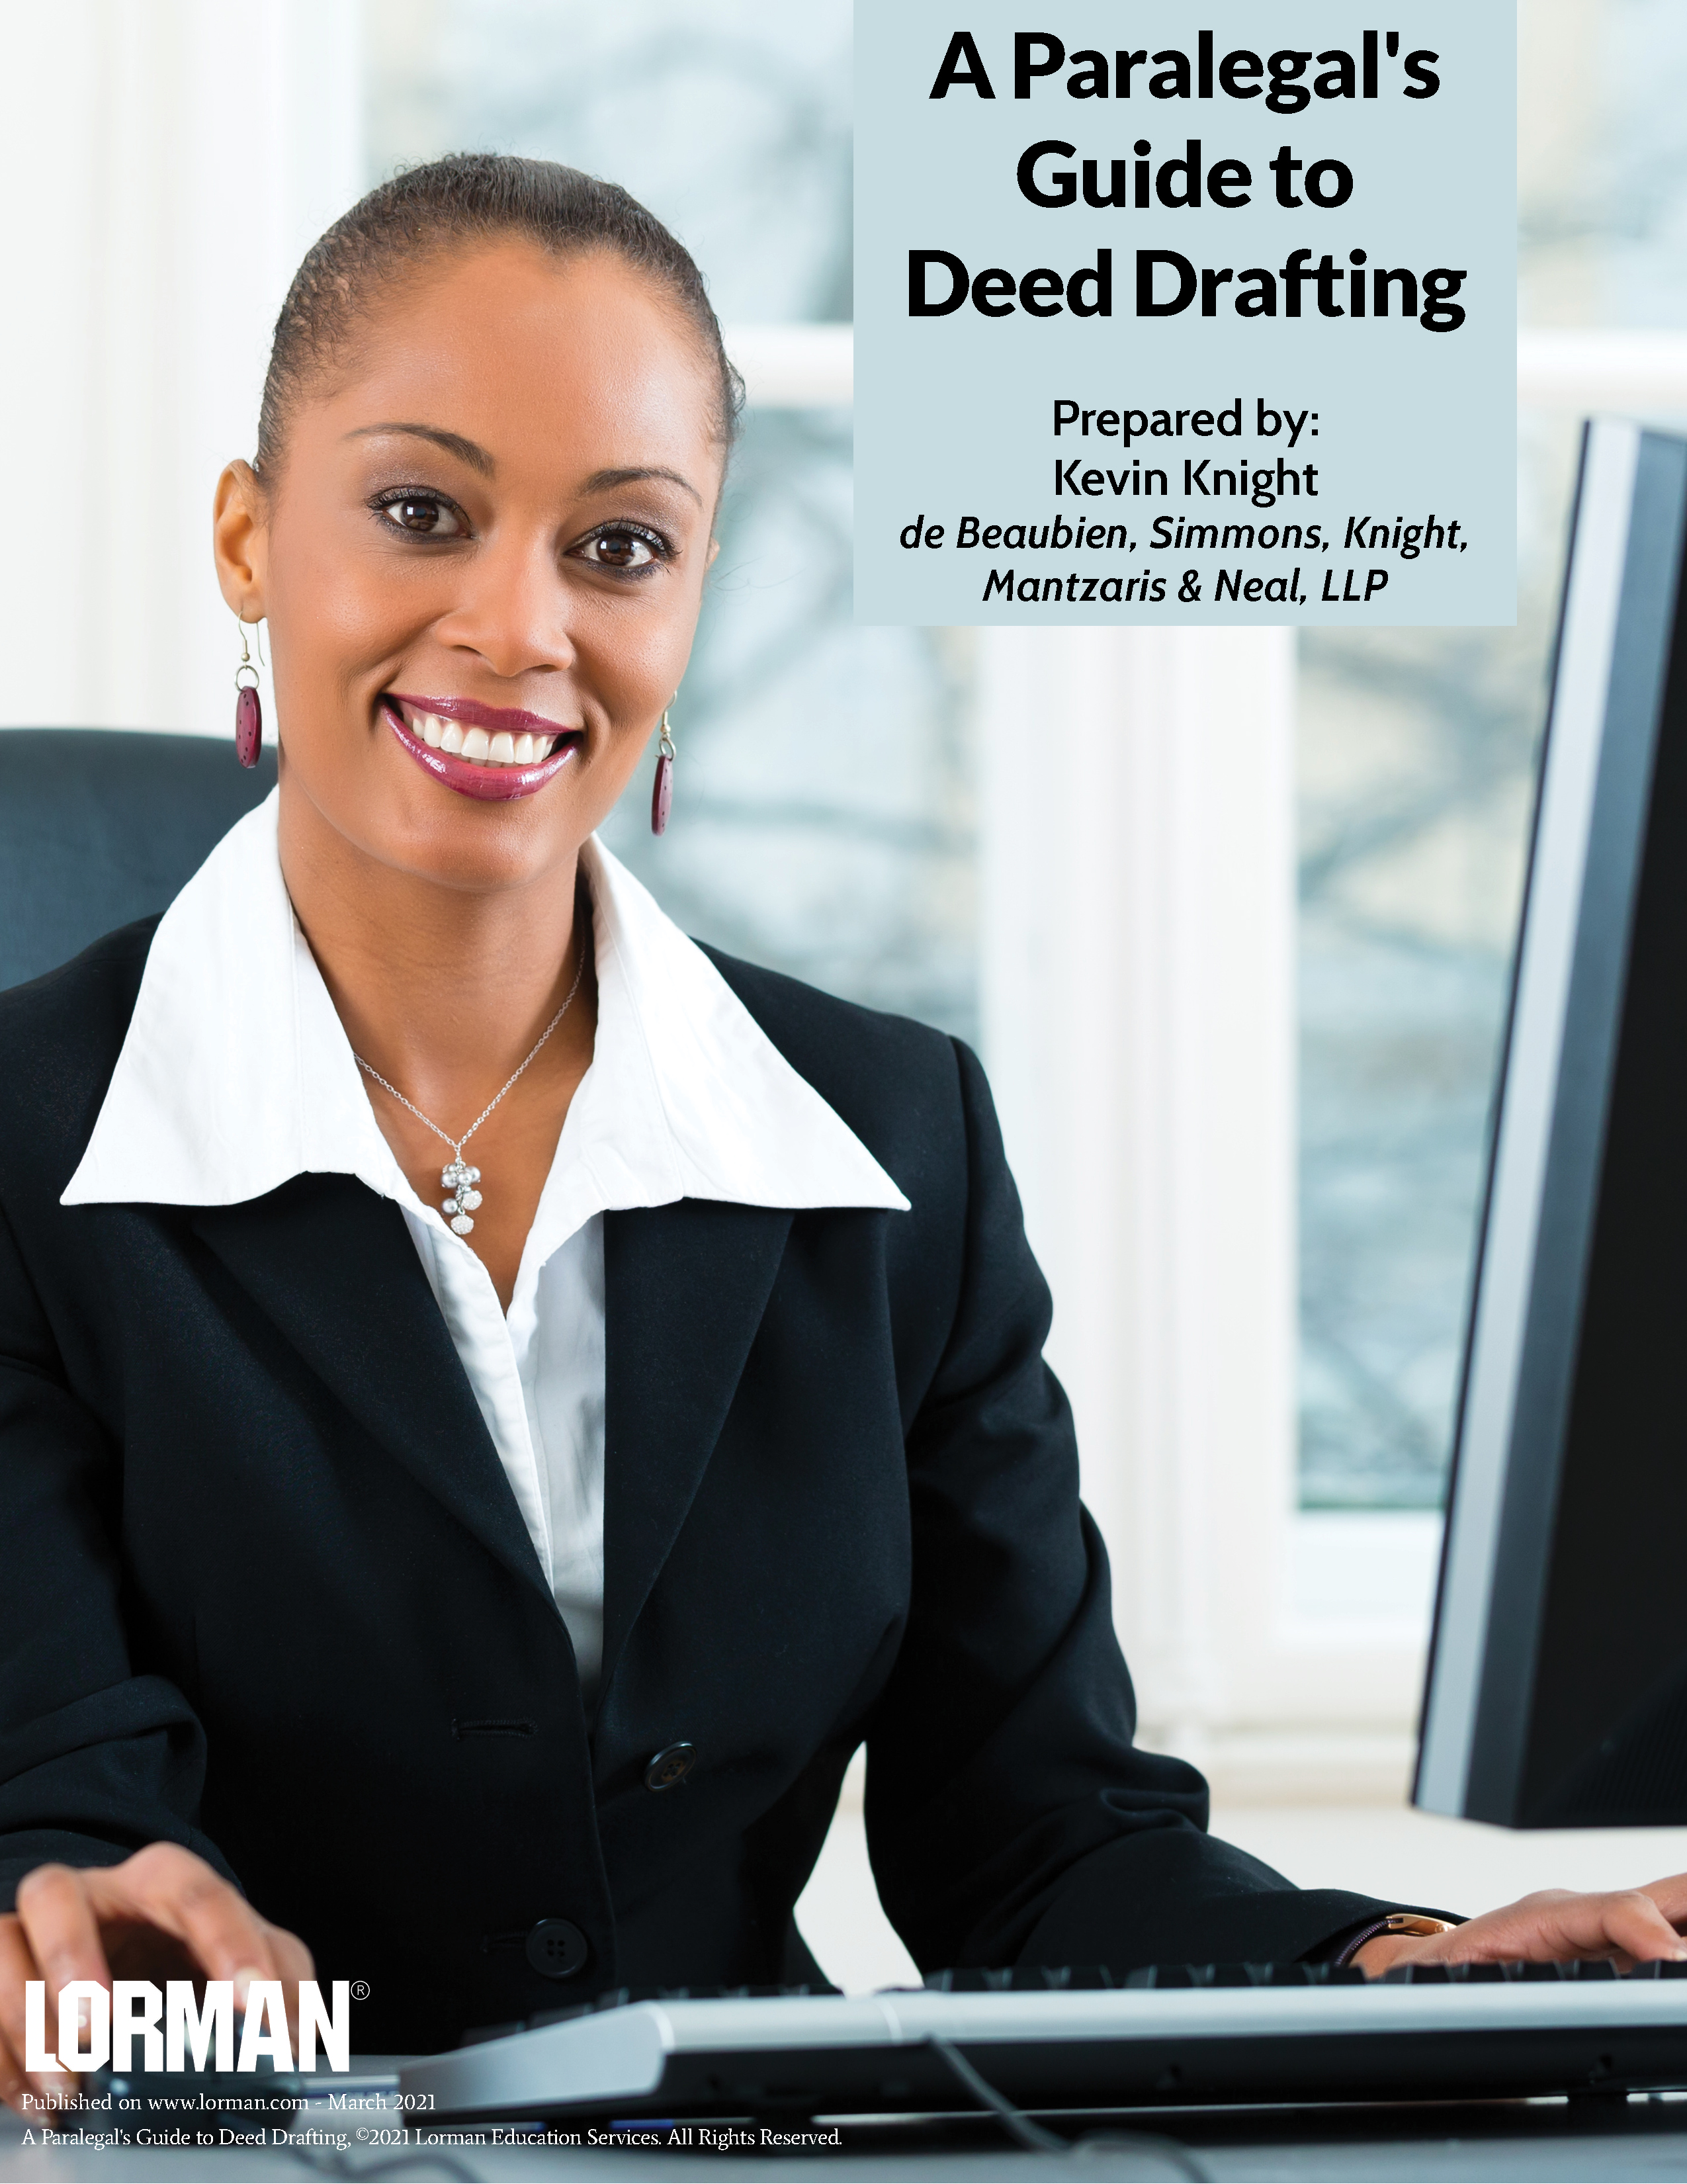 A Paralegal's Guide to Deed Drafting